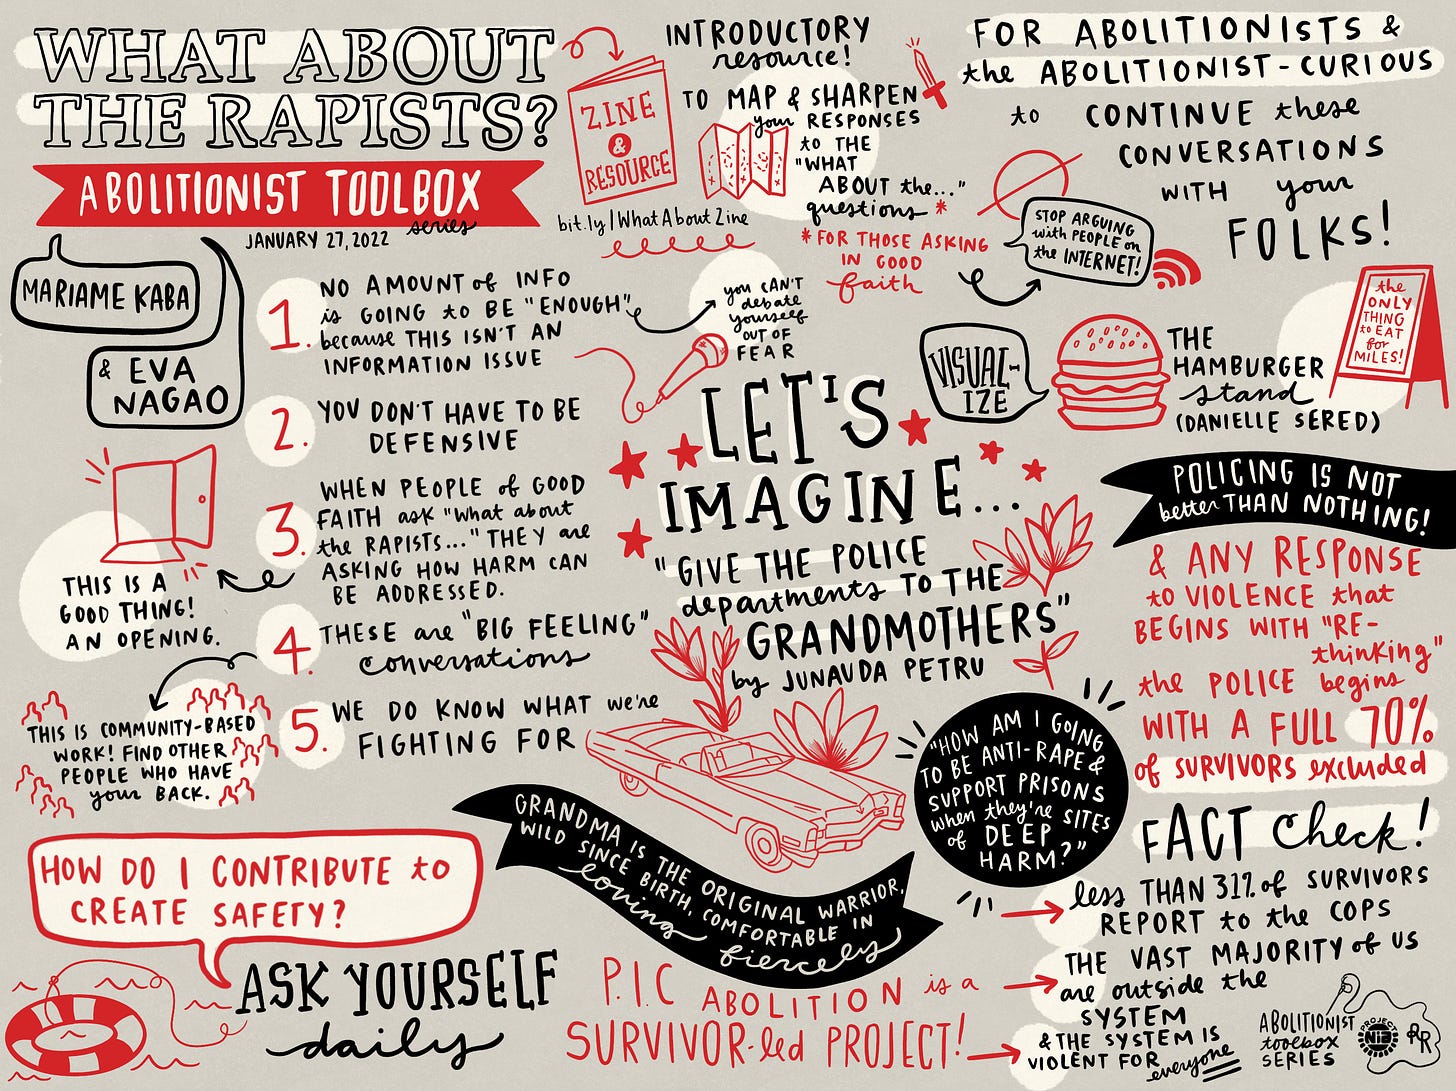 1 of 2 graphic recording images for the "What about the Rapists?" Abolitionist Toolbox Sessions